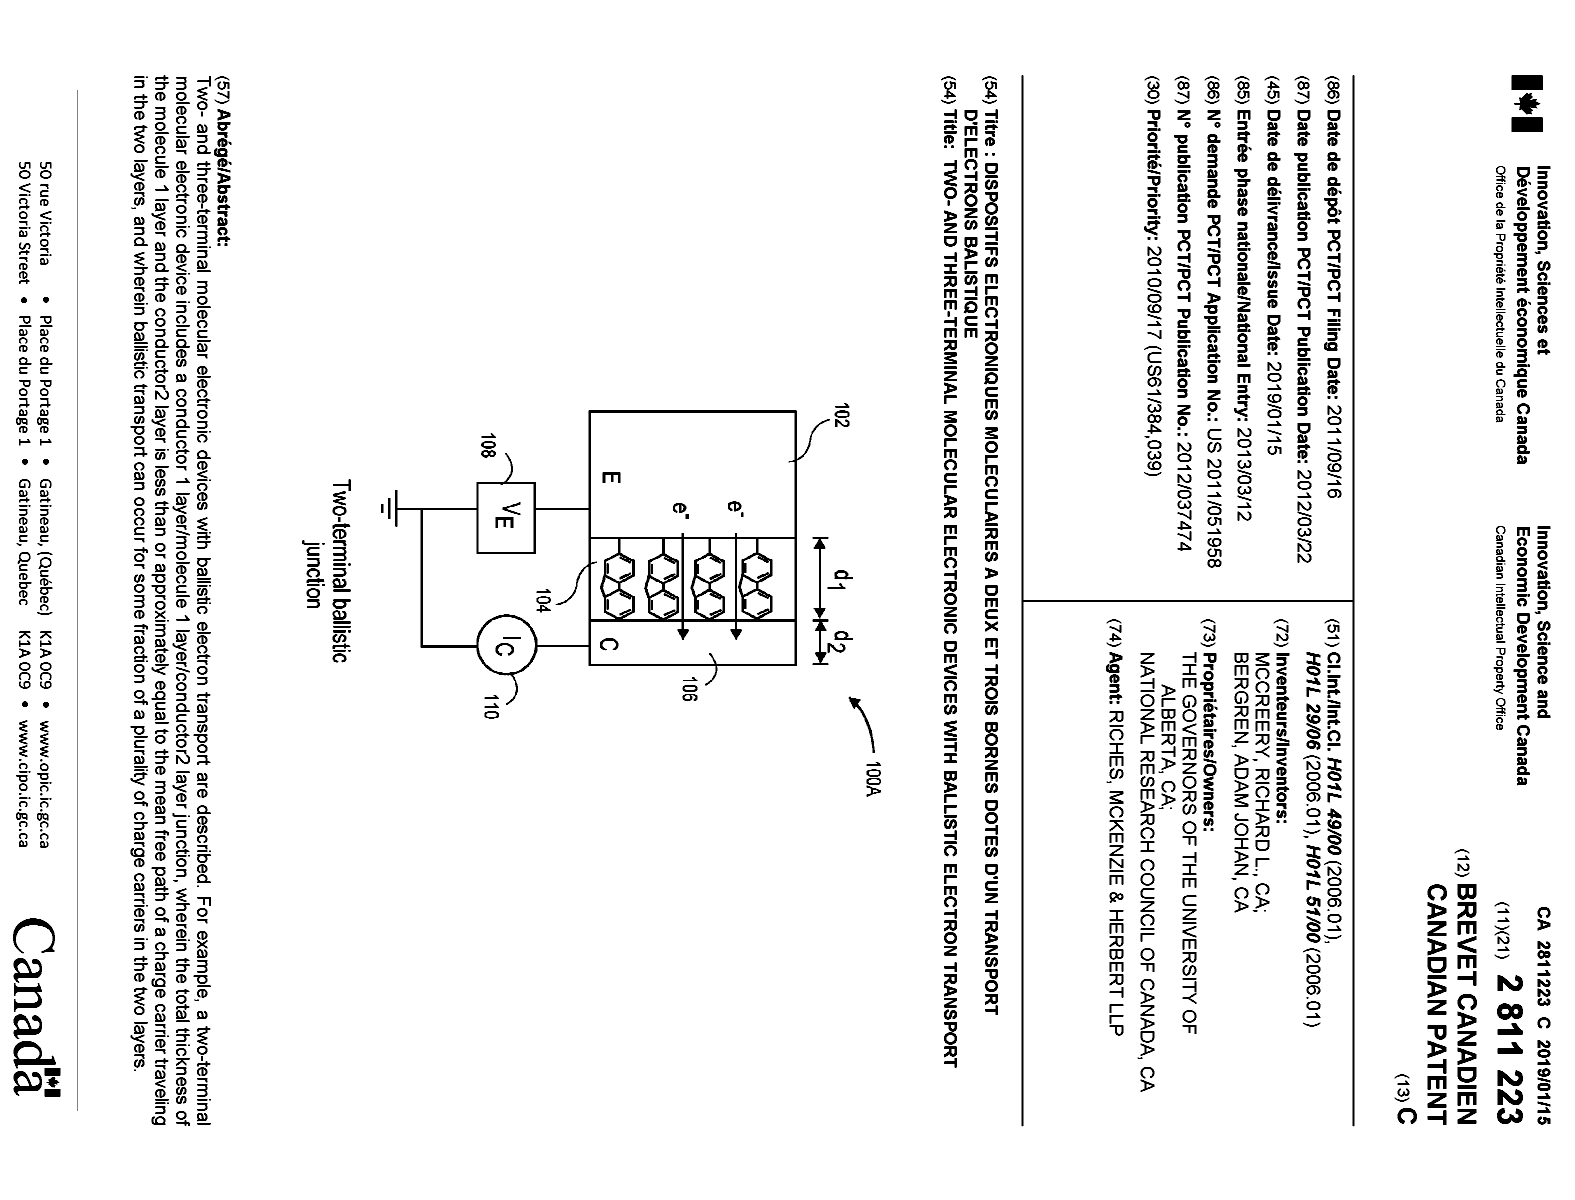 Canadian Patent Document 2811223. Cover Page 20181219. Image 1 of 1